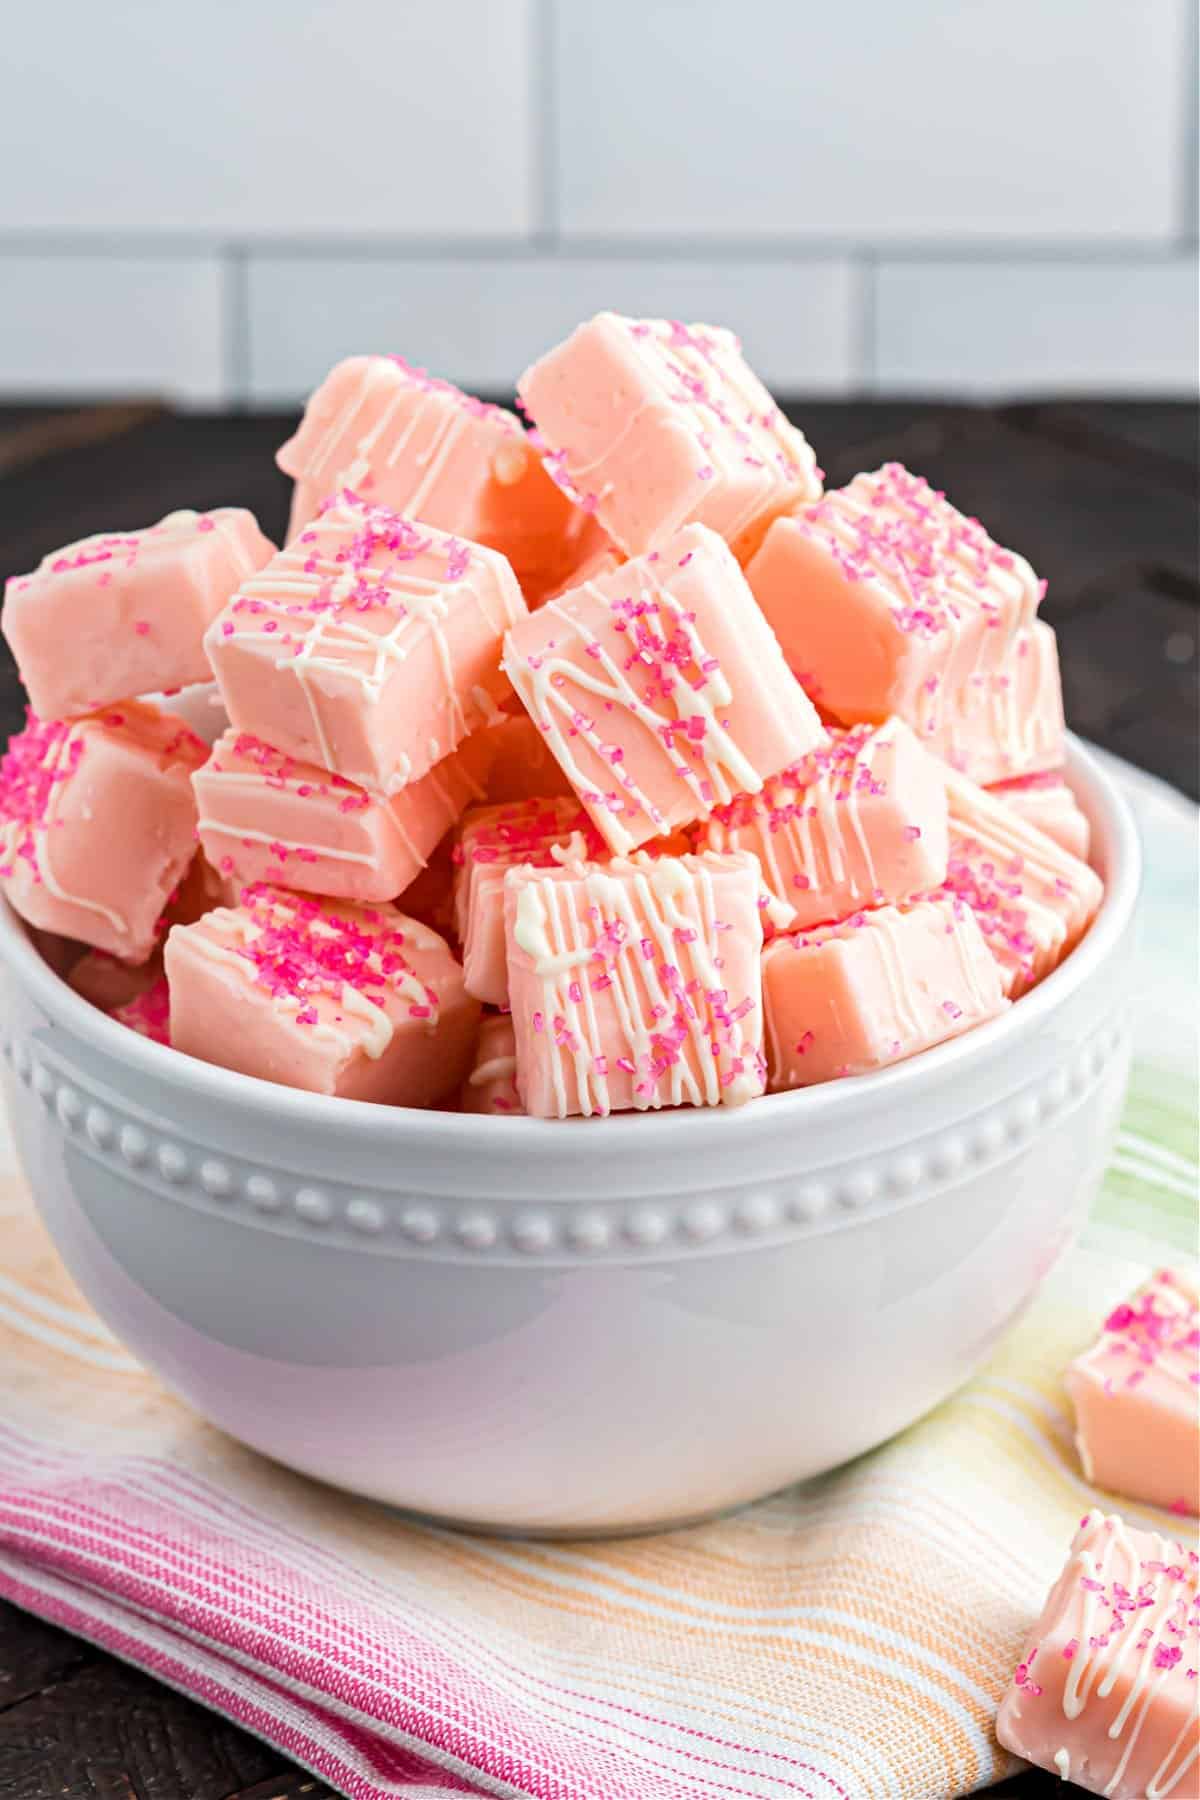 Pieces of pink lemonade fudge in a white serving bowl.